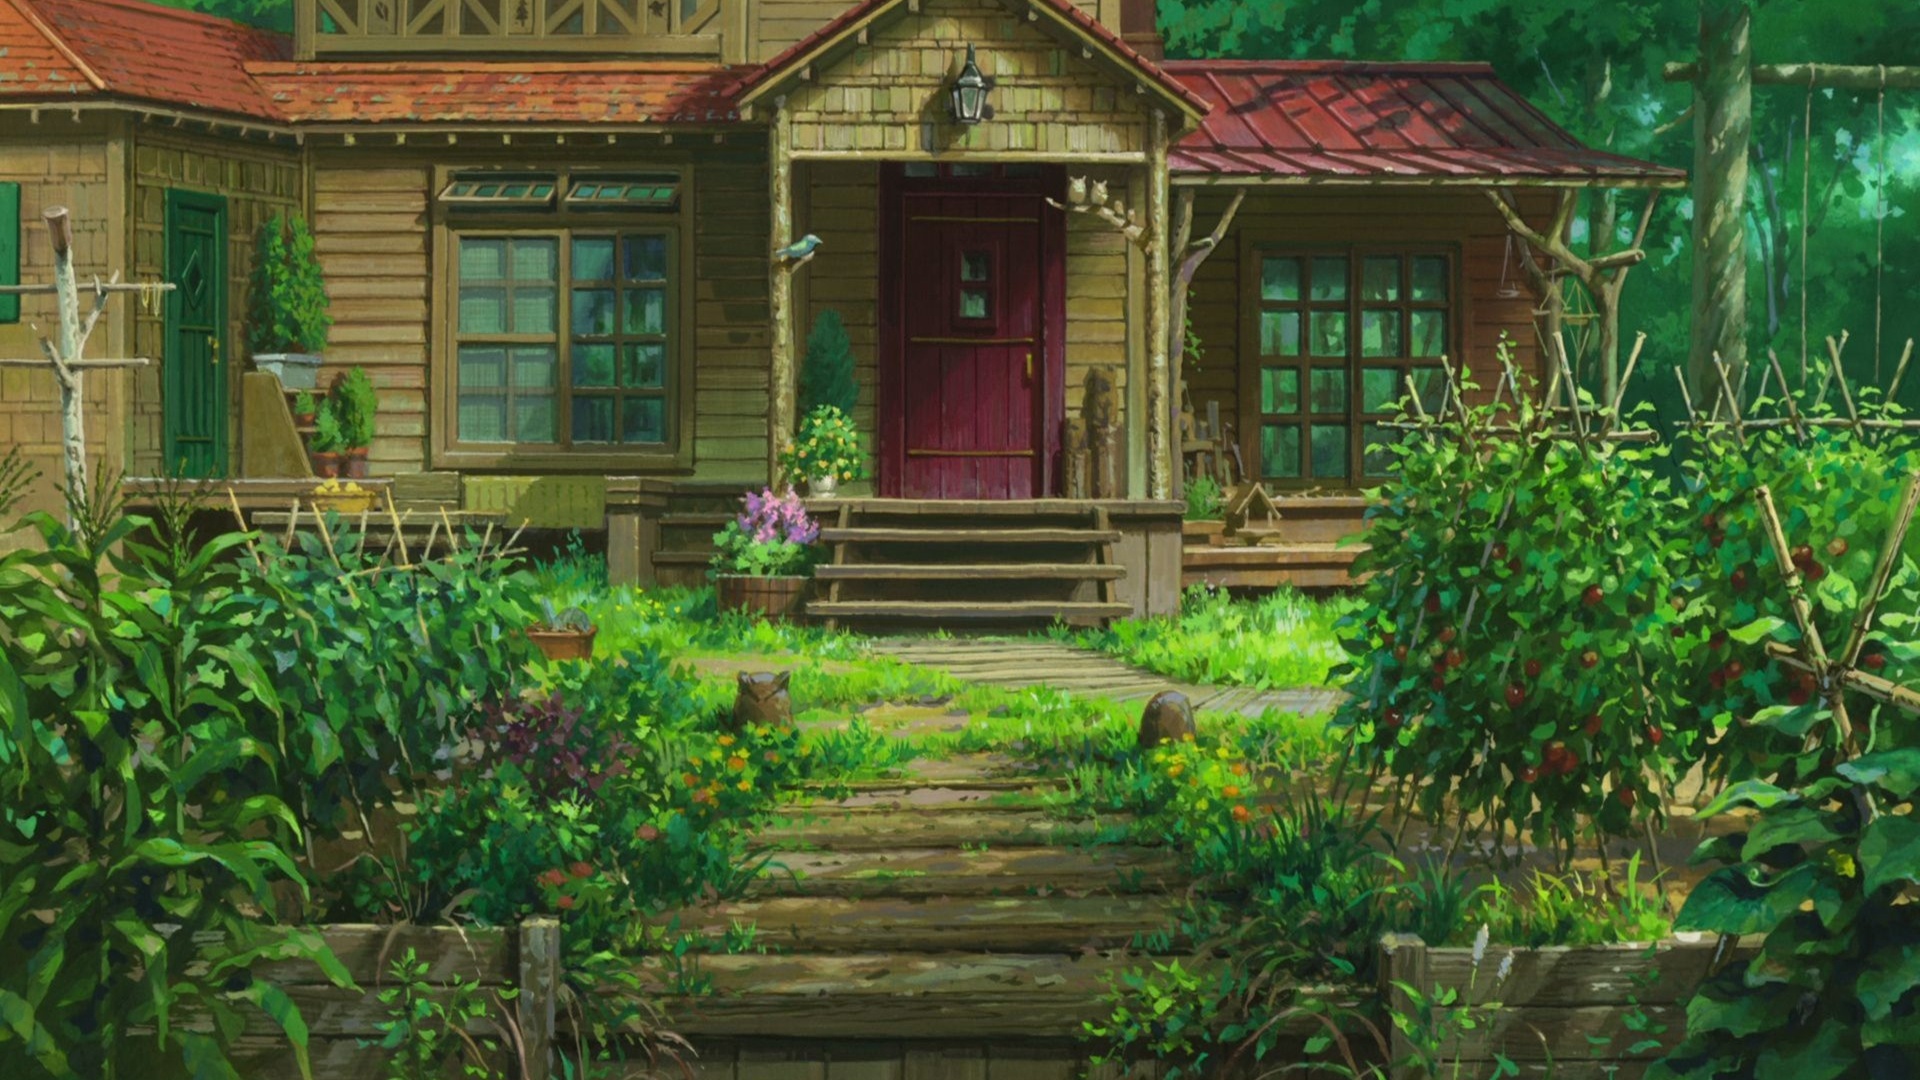 When Marnie Was There (Anime): Japanese cartoon, Abandoned house, Wetland mansion. 1920x1080 Full HD Wallpaper.